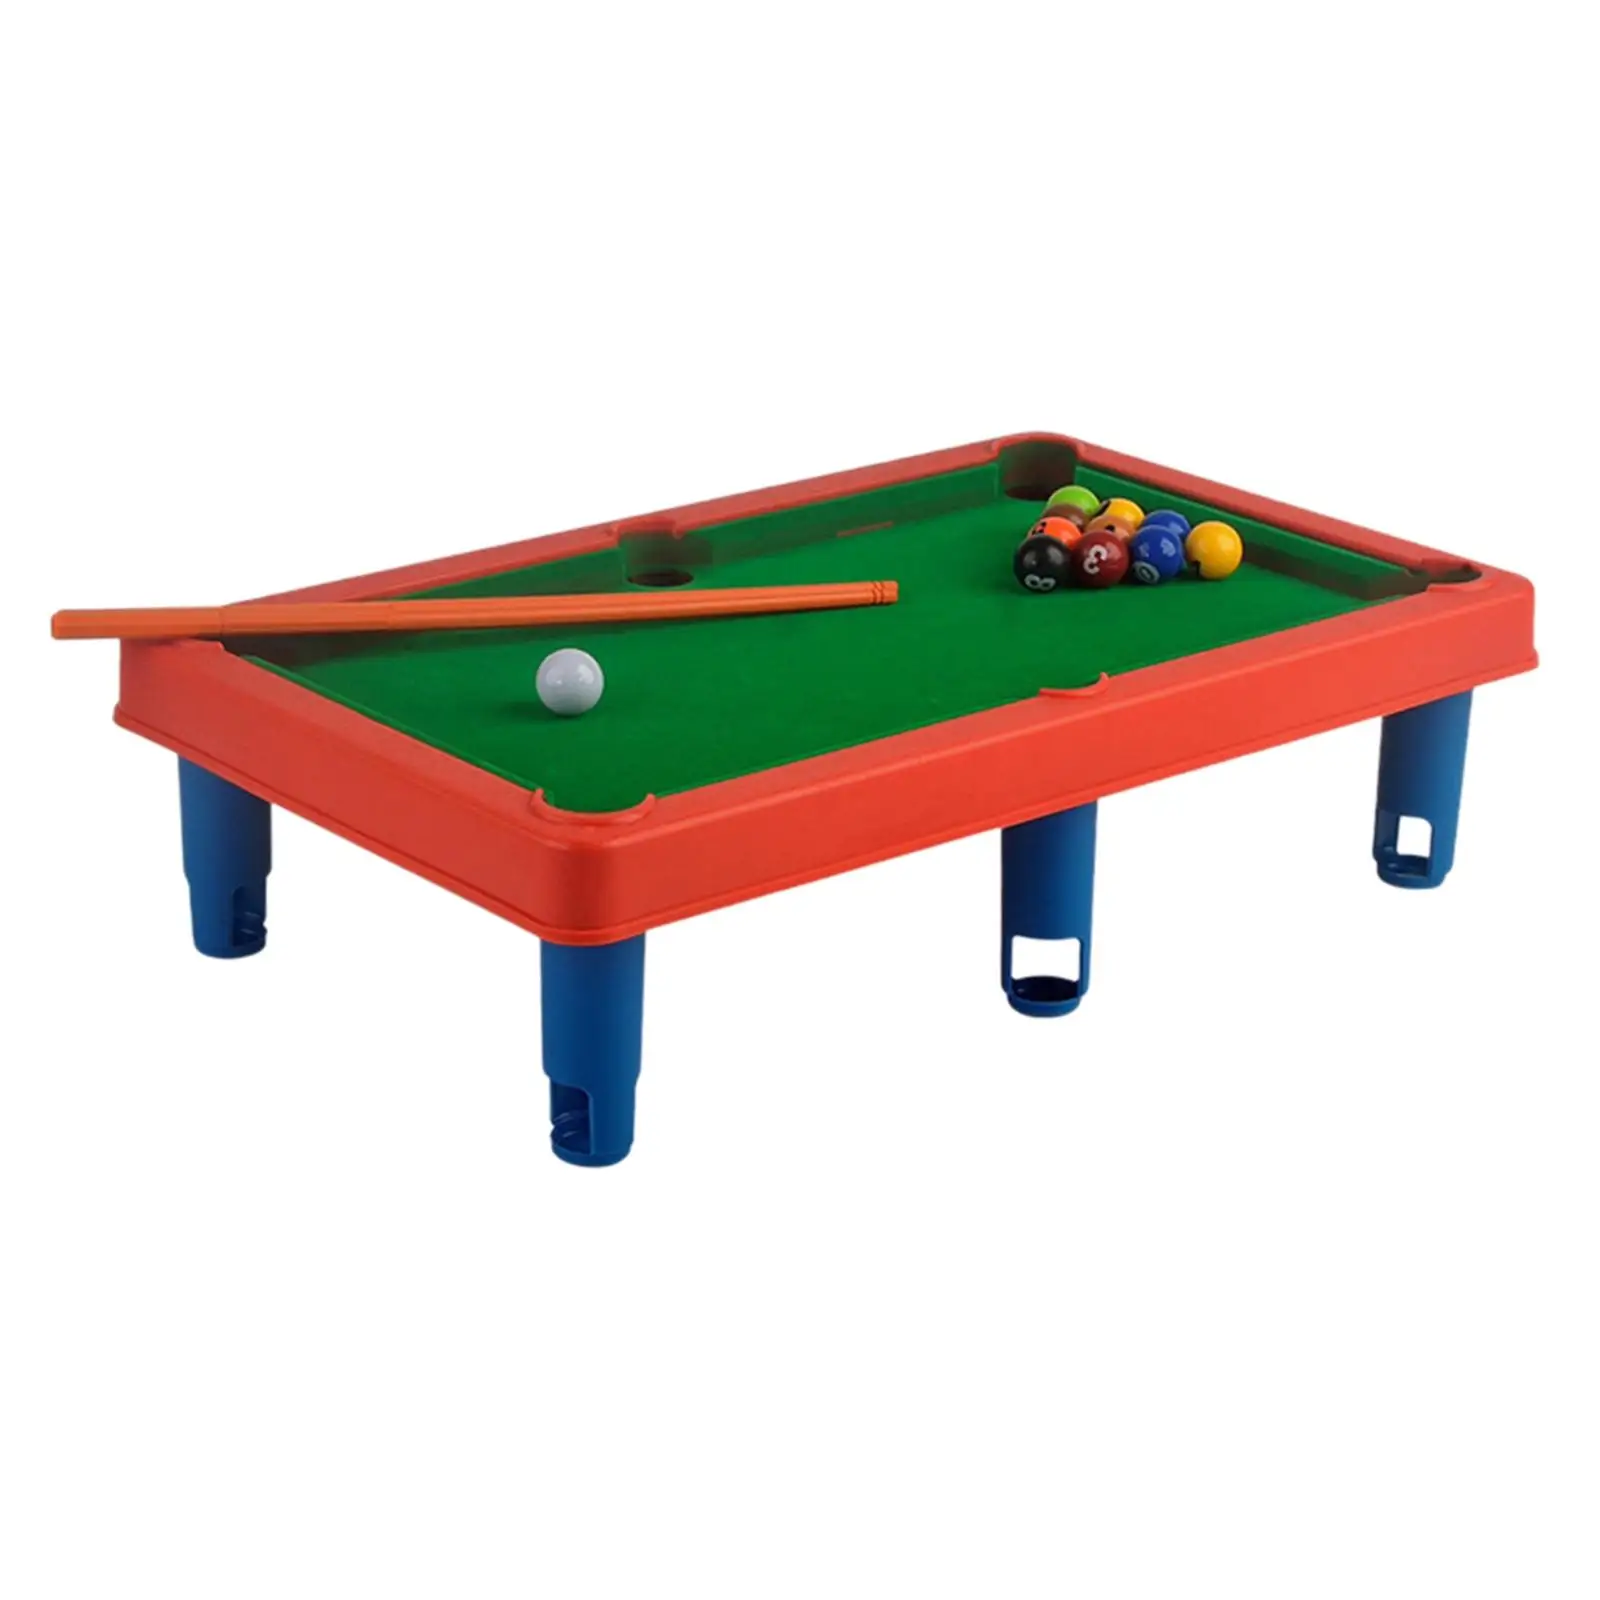 Mini Pool Table Set Home Use Educational Interactive Toys Small Tabletop